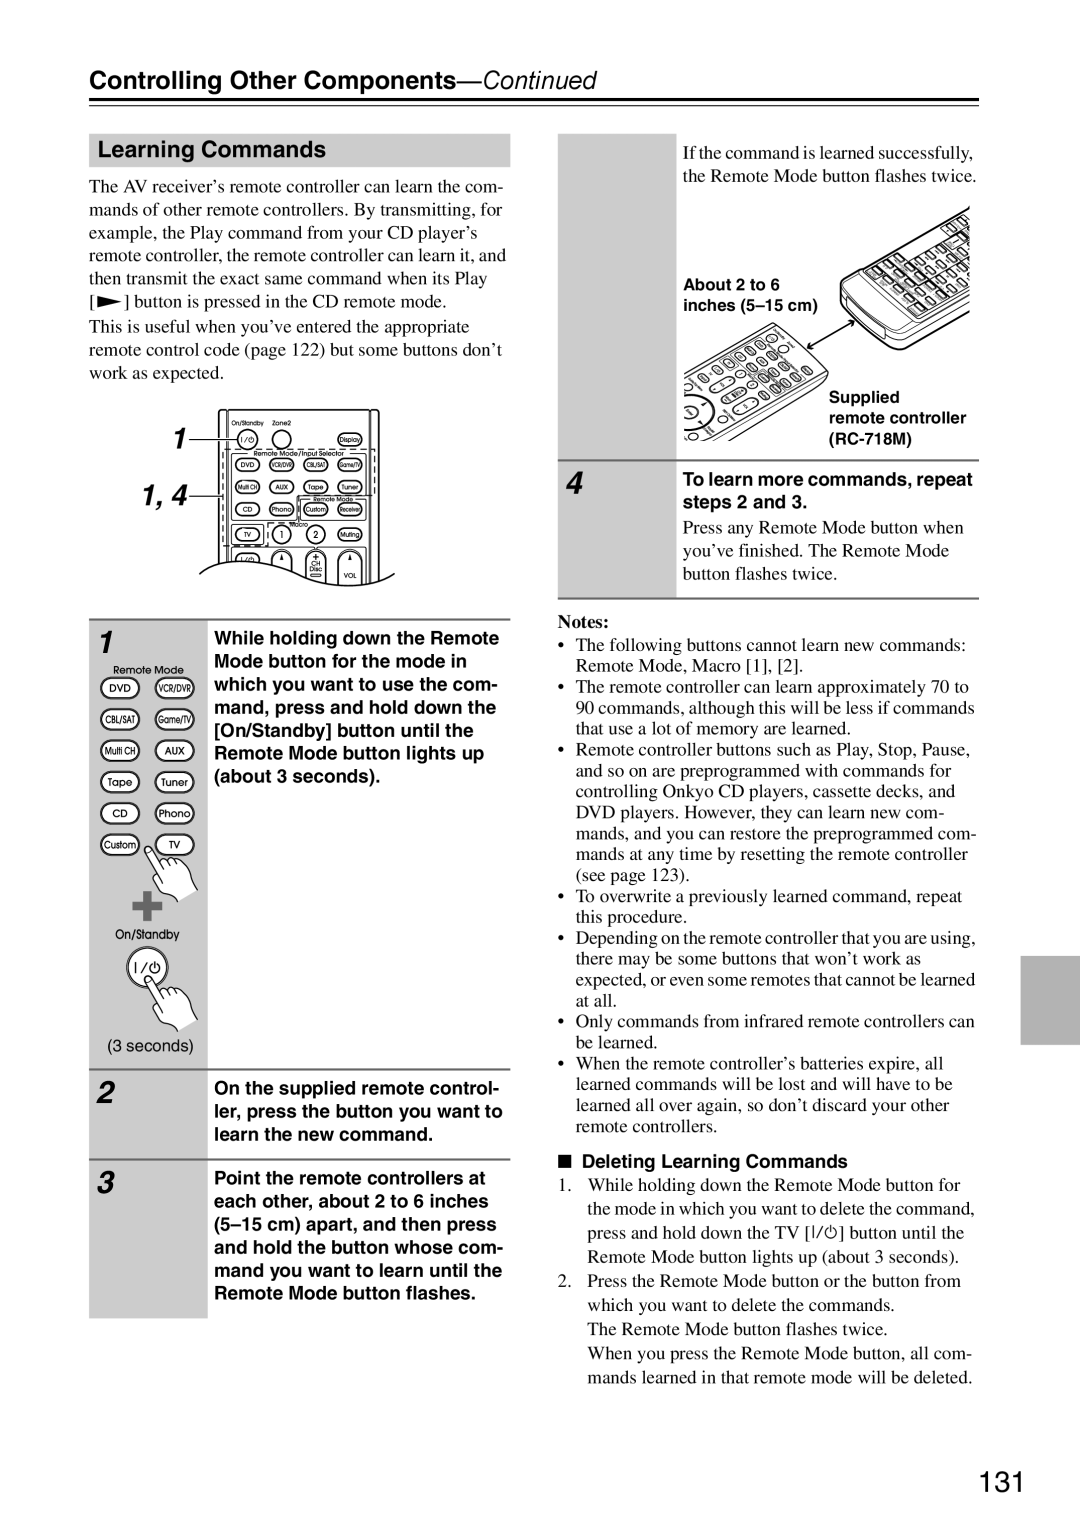 Onkyo DTR-7.9 instruction manual Learning Commands, Controlling Other Components—Continued, Notes 